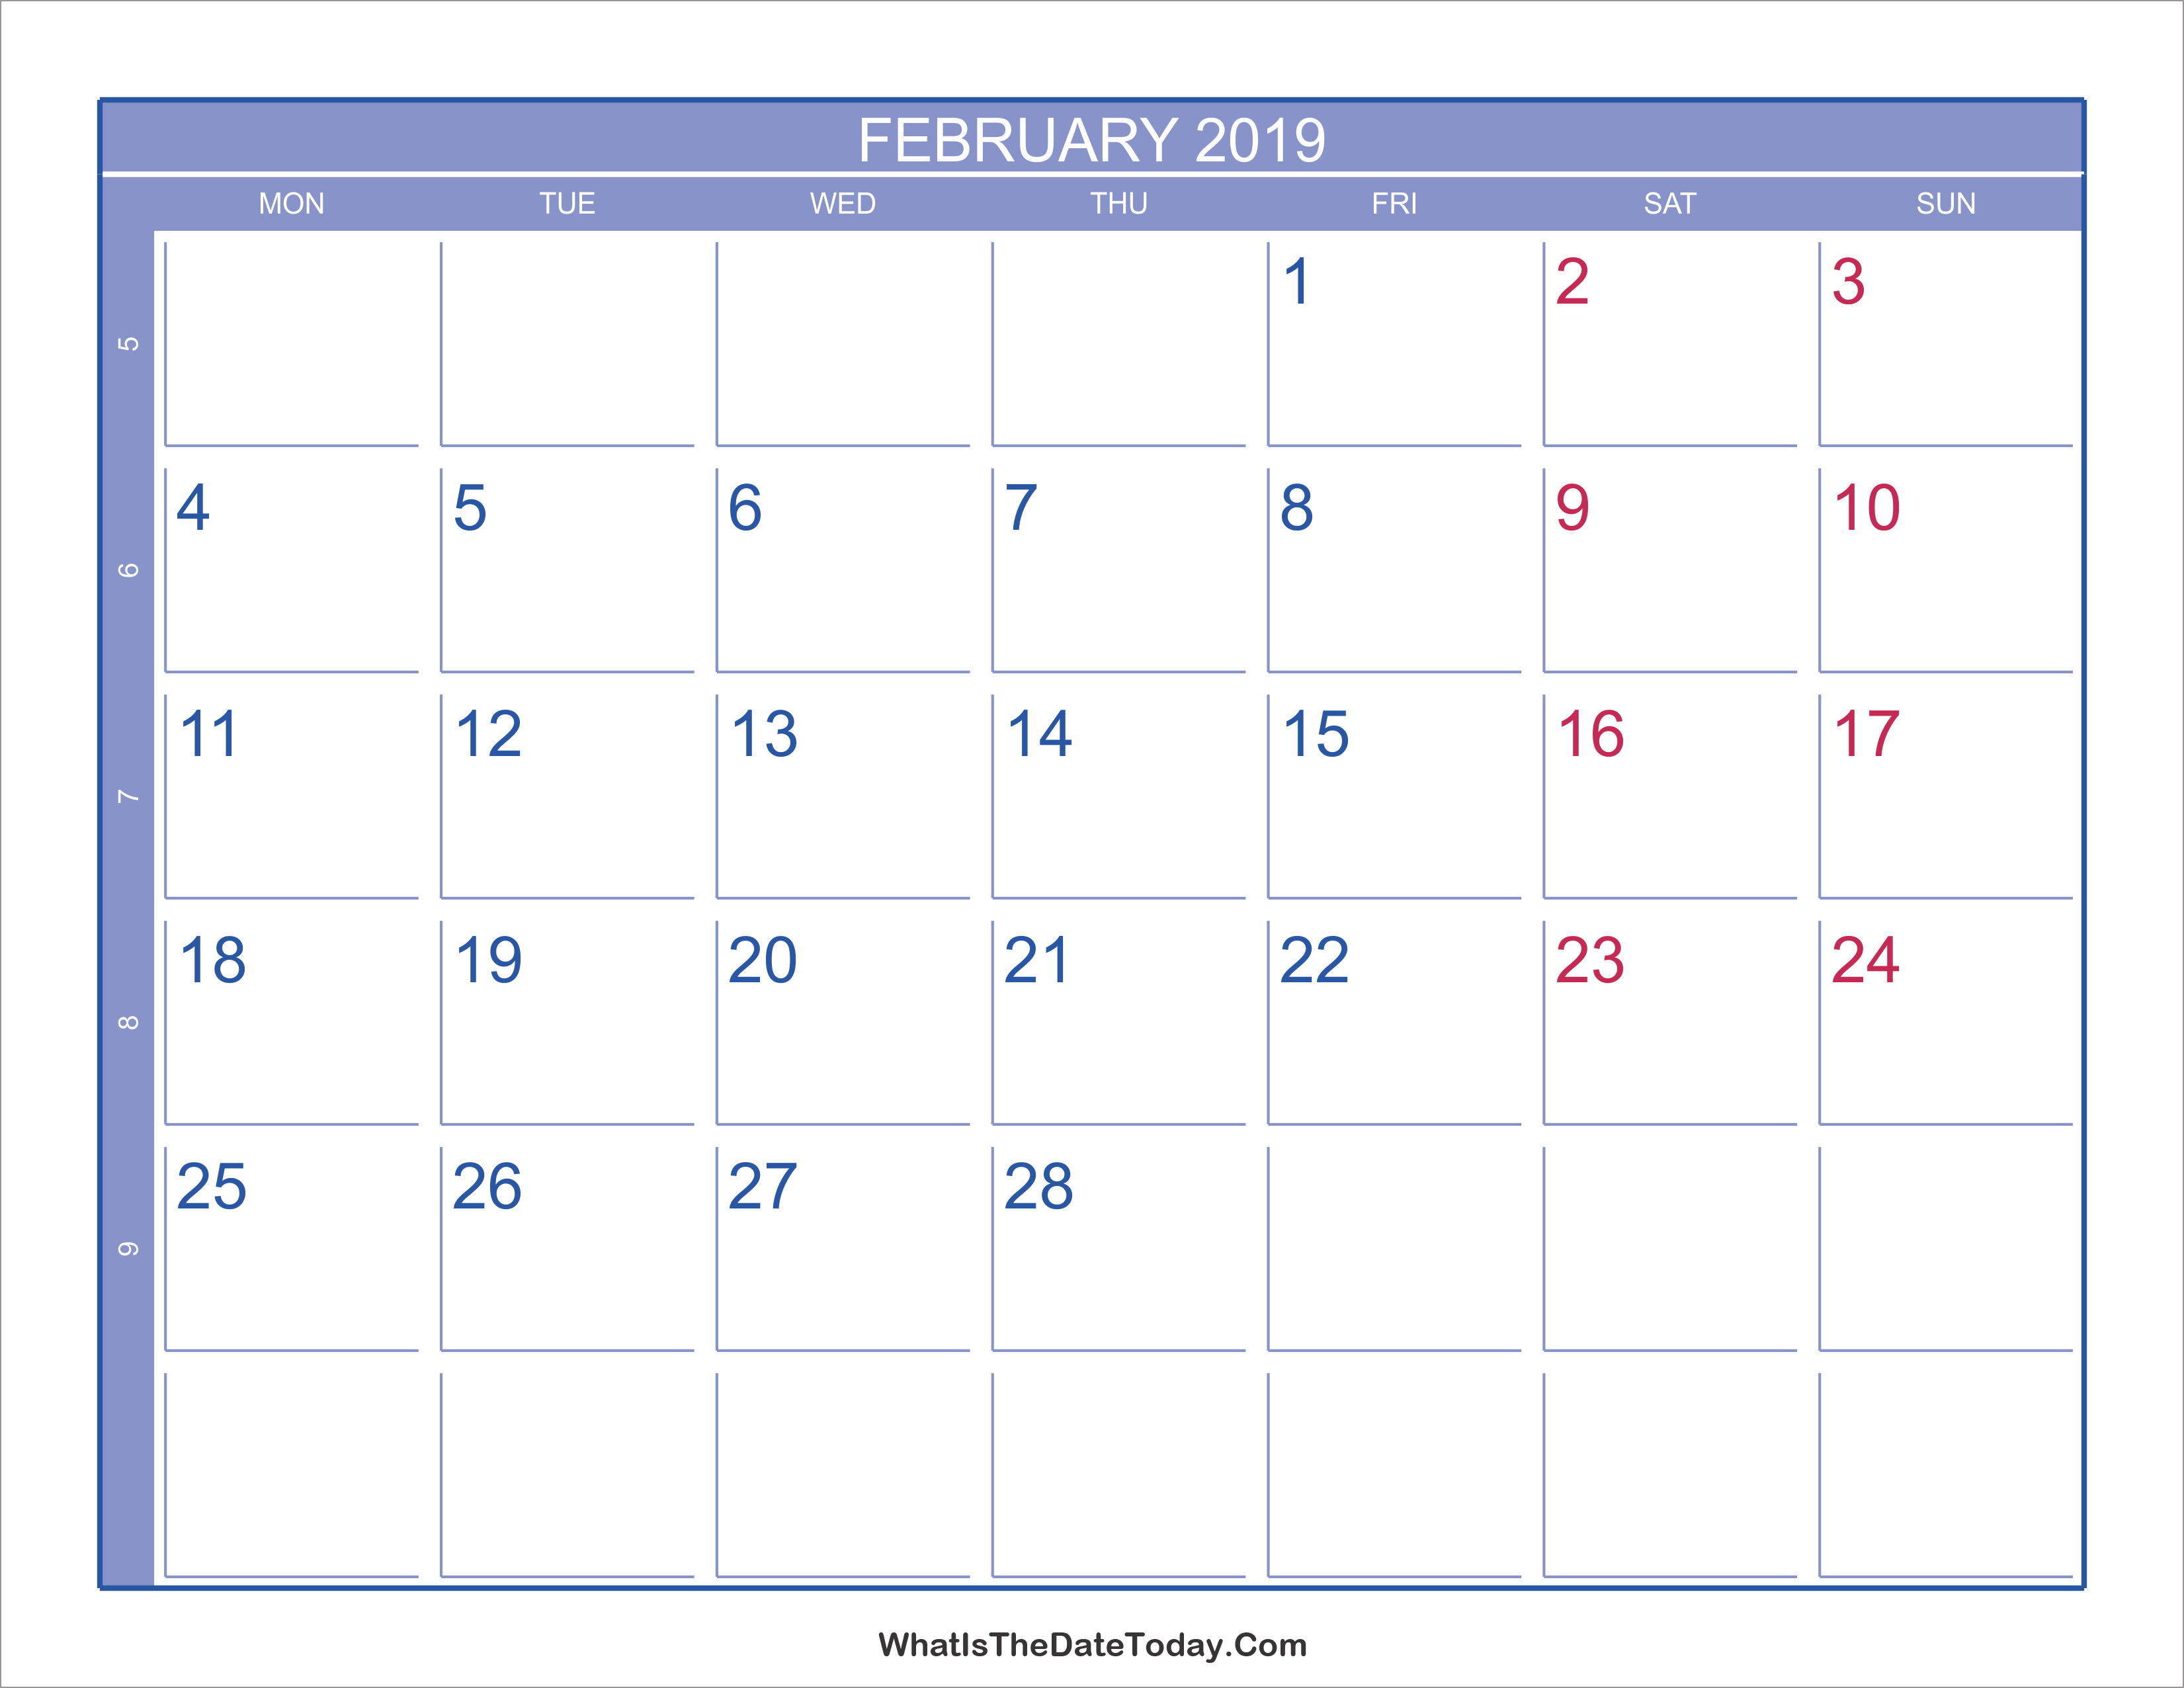 2019 February Calendar With Week Numbers Whatisthedatetoday Com